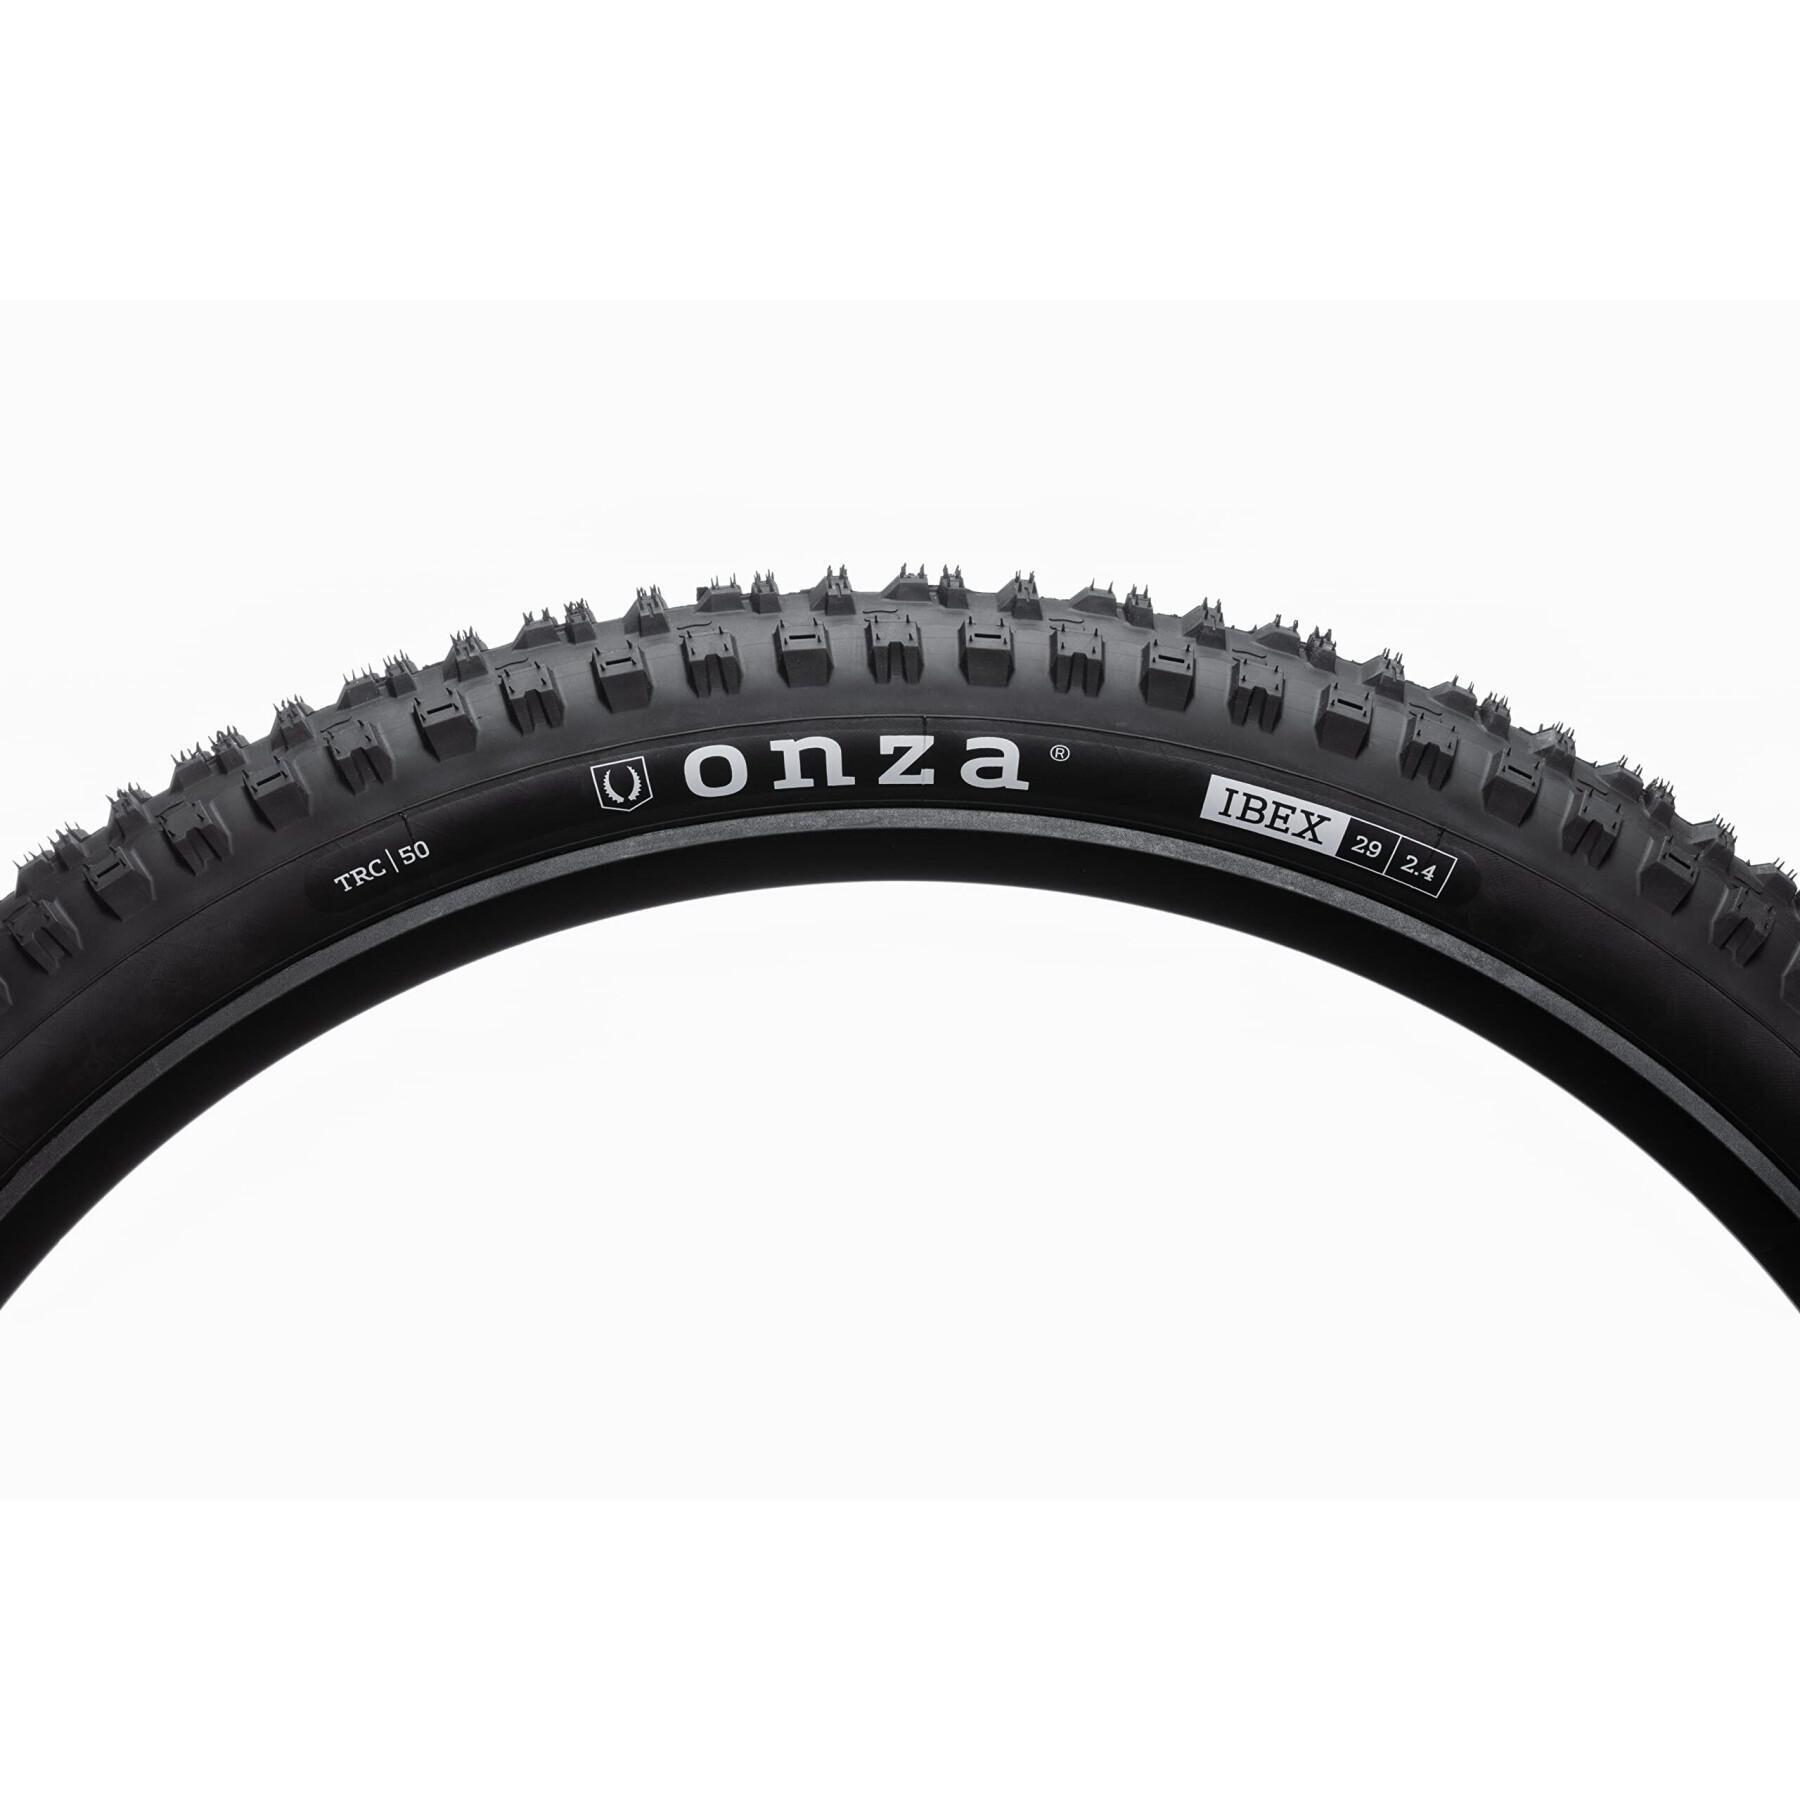 Tire Onza Ibex TRC 60 TPI gomme ,50a | 45a, 61-622, 880 g